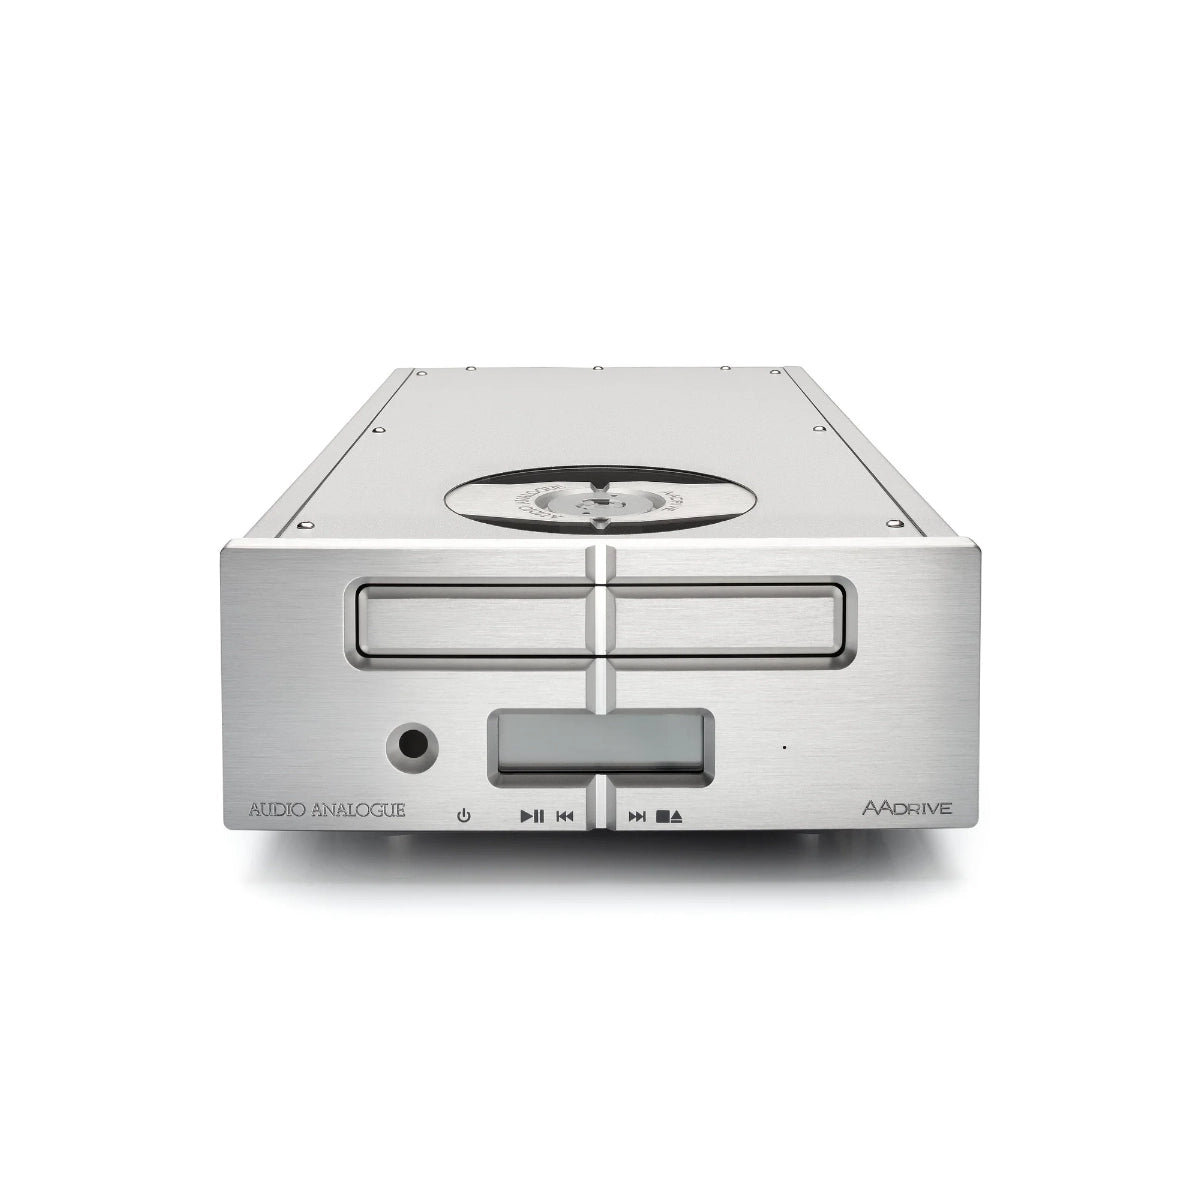 A picture of Audio Analogue's AAdrive CD Player in silver finish.